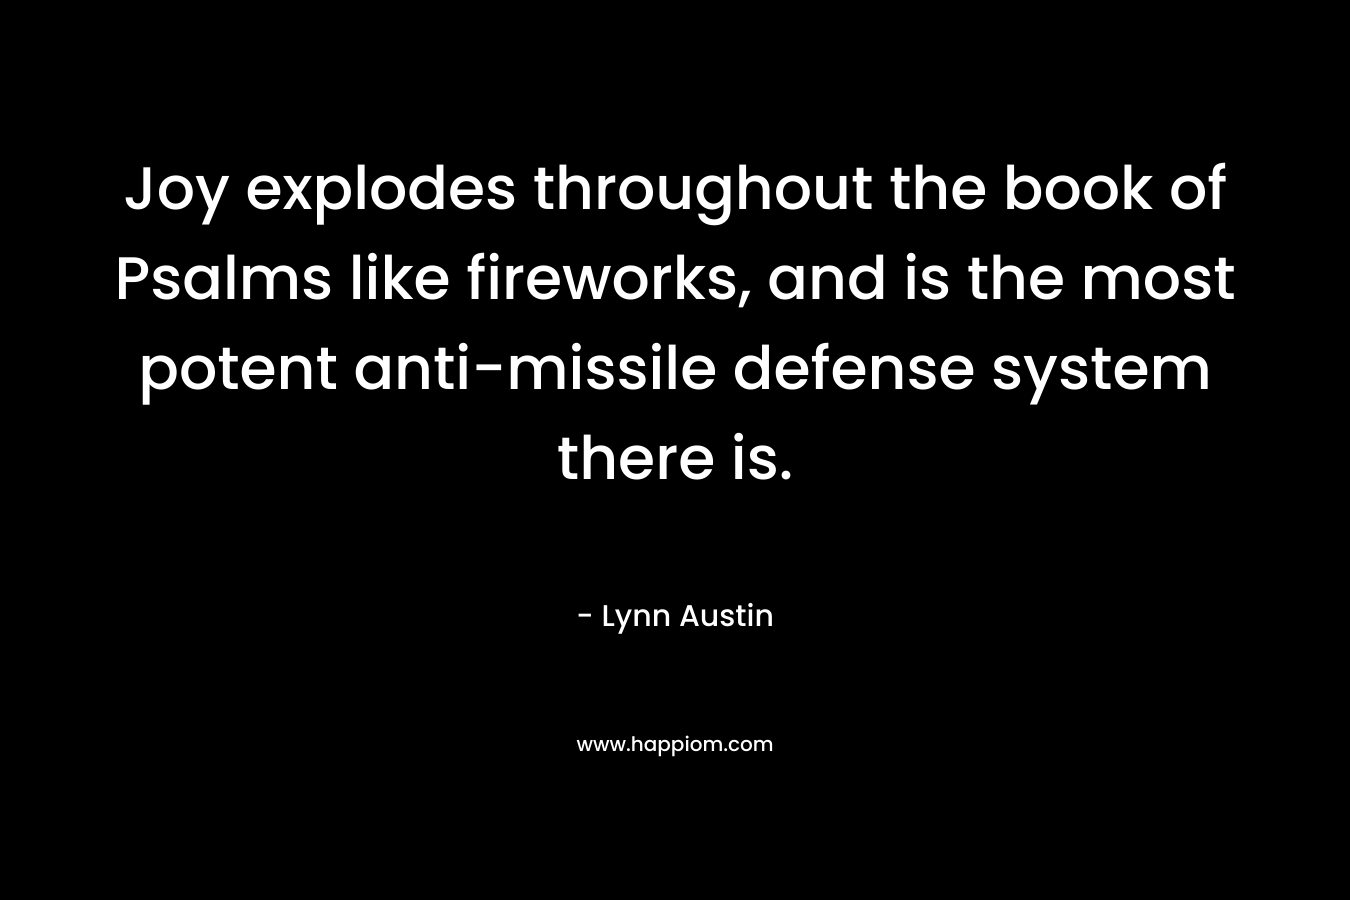 Joy explodes throughout the book of Psalms like fireworks, and is the most potent anti-missile defense system there is.